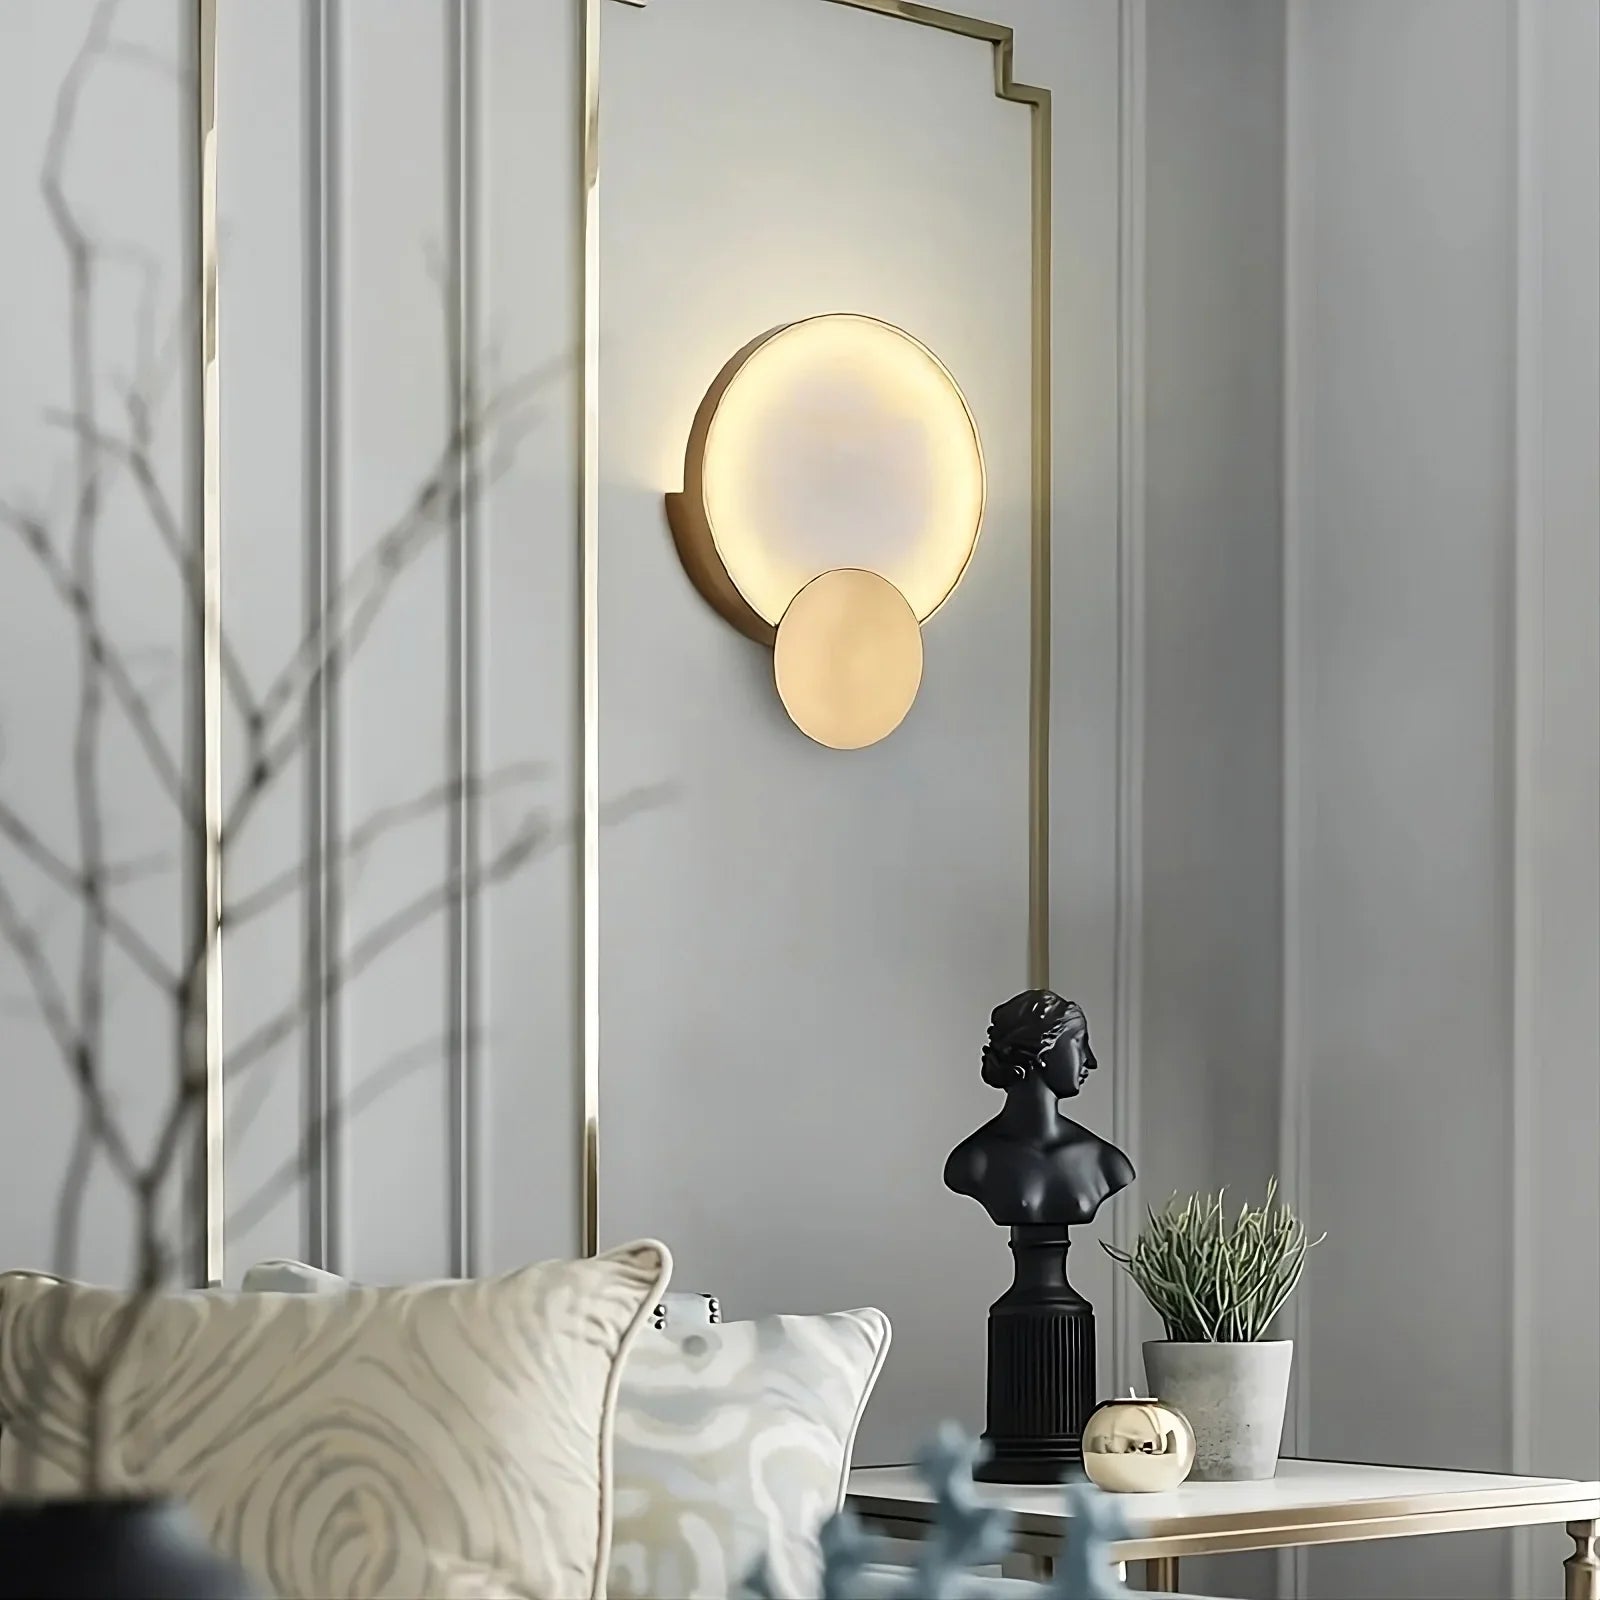 marble wall sconce in a modern interior